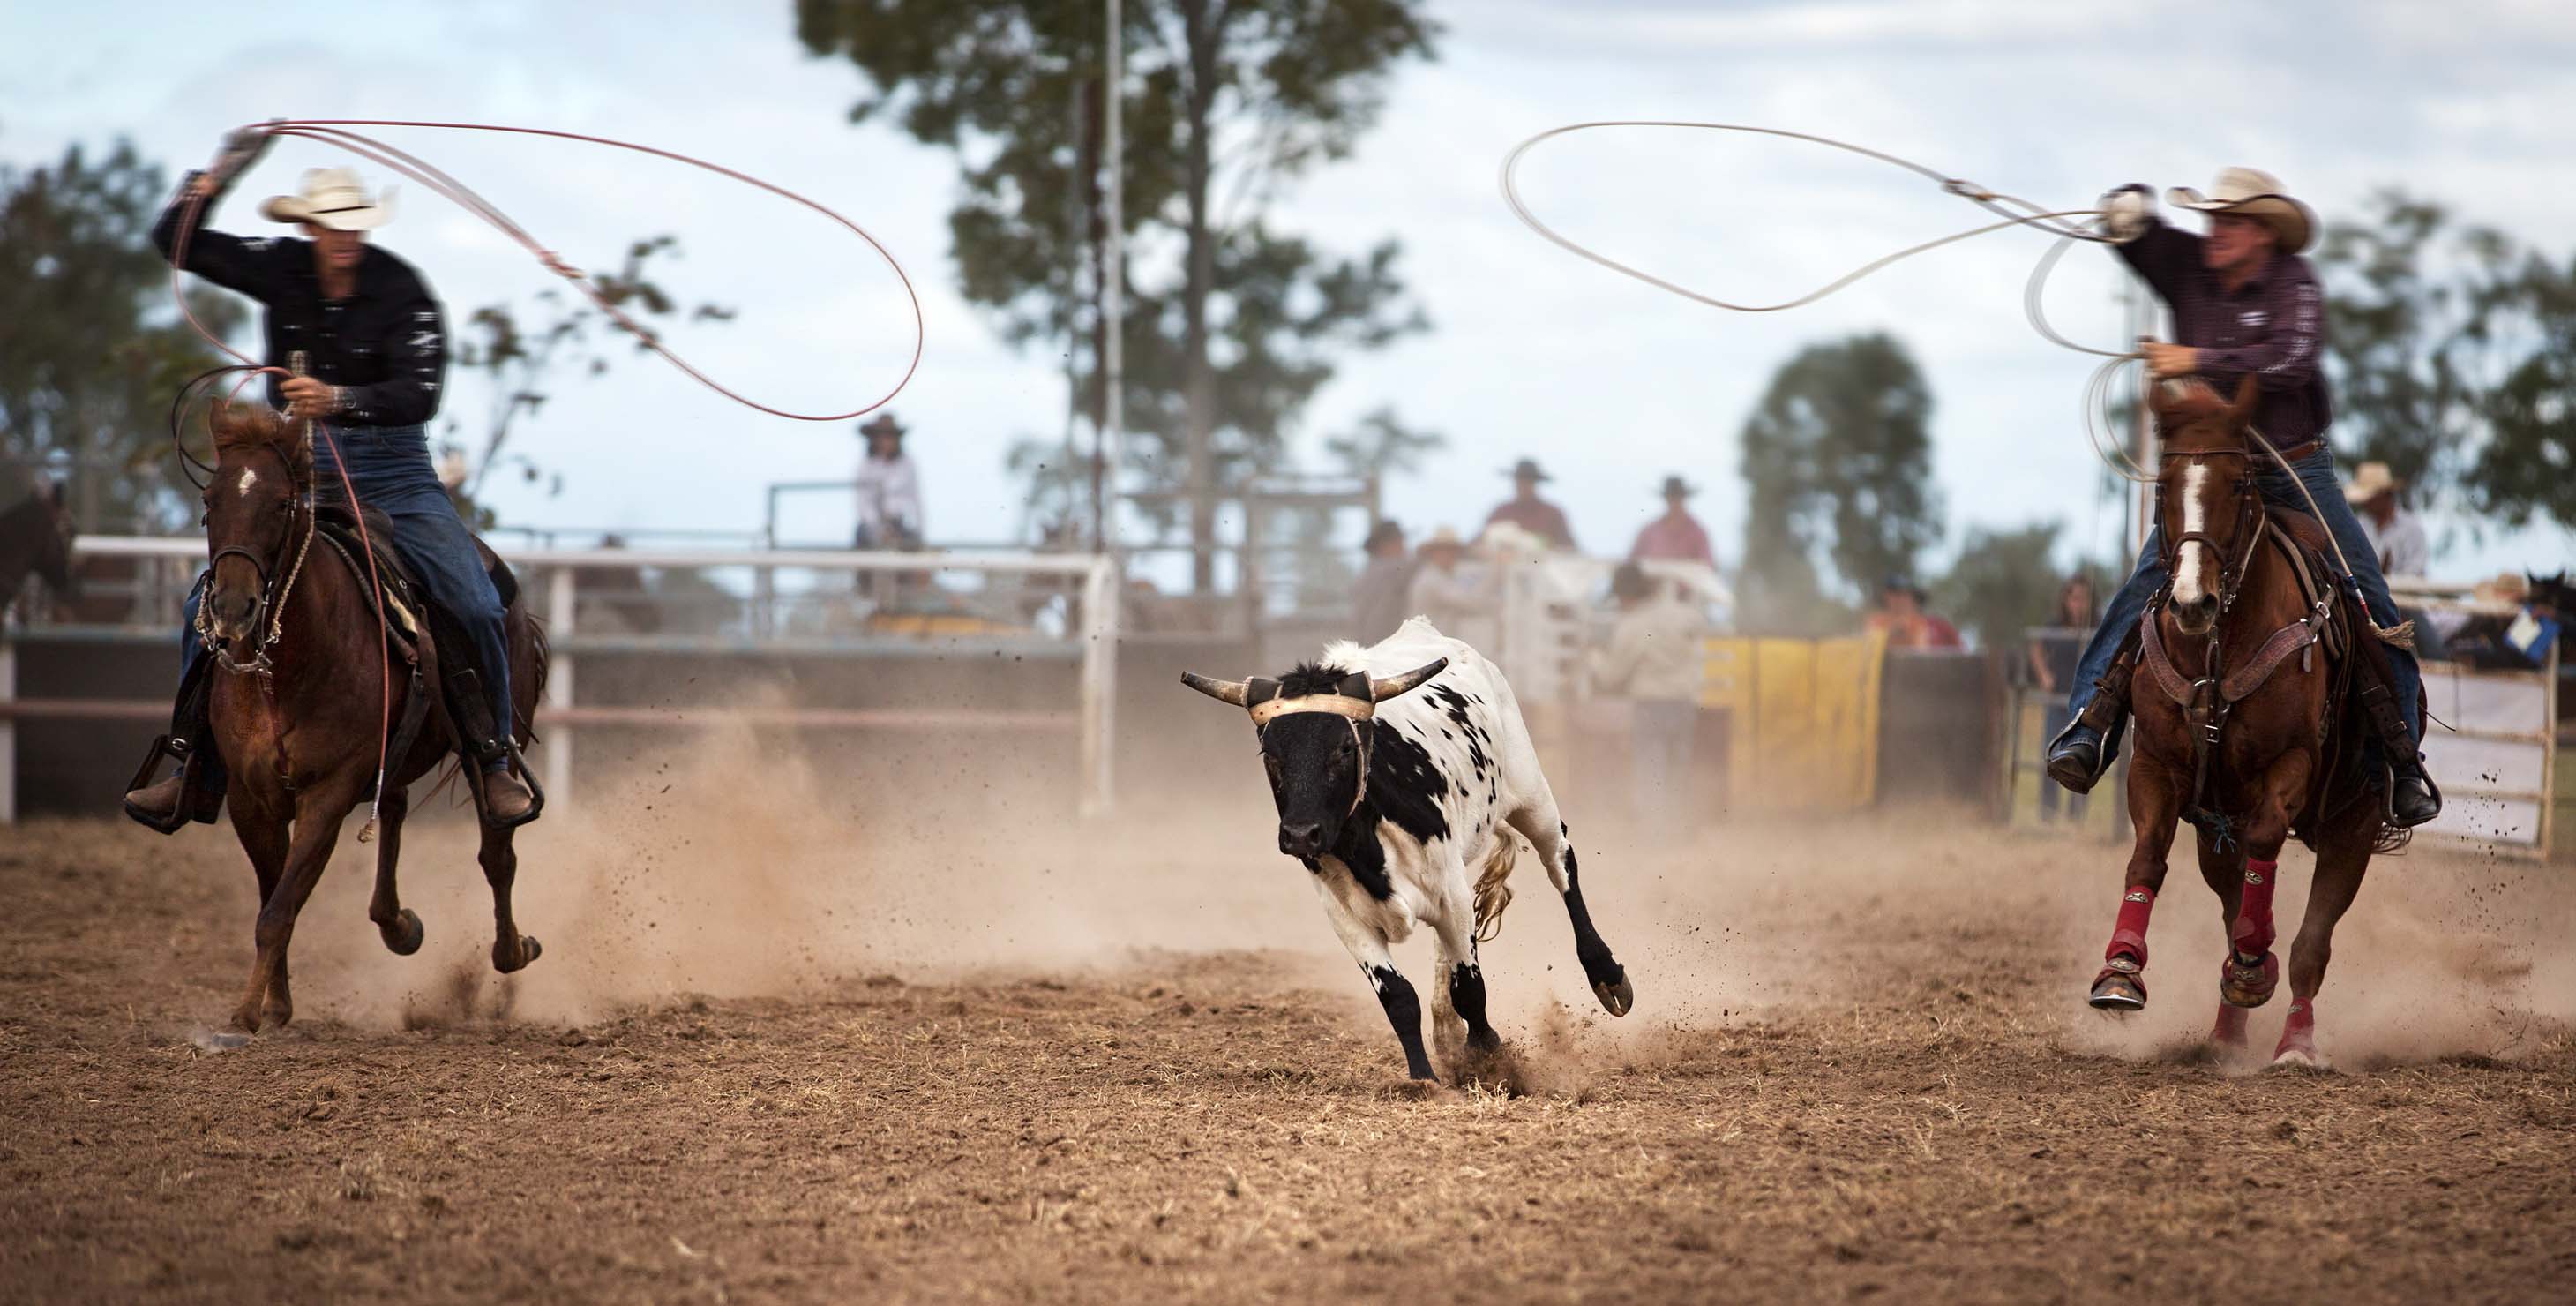 Two cowboys try to lasso a bull at a rodeo